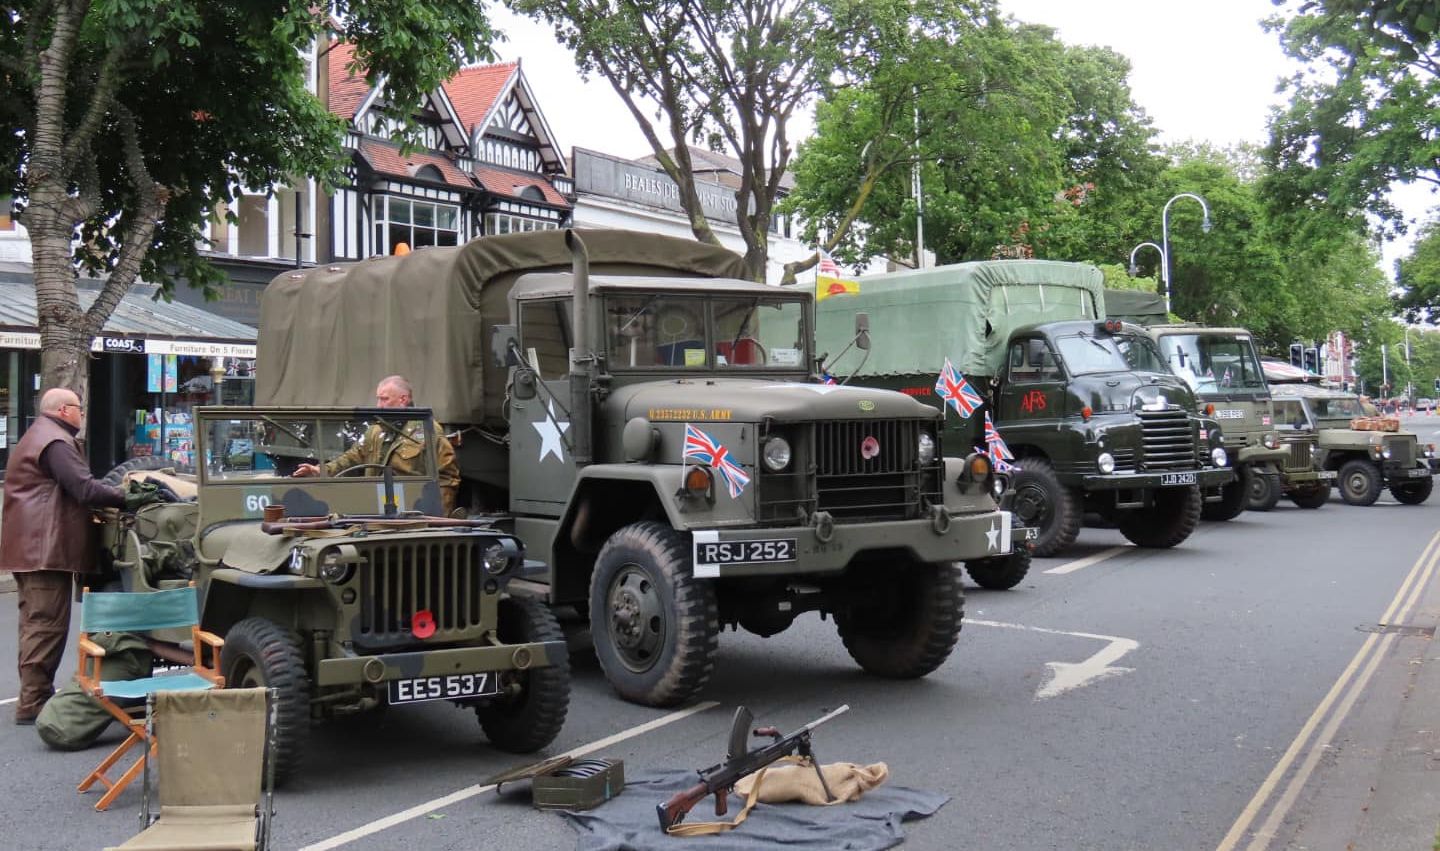 Southport Armed Forces Day. Photo by Andrew Brown Stand Up For Southport